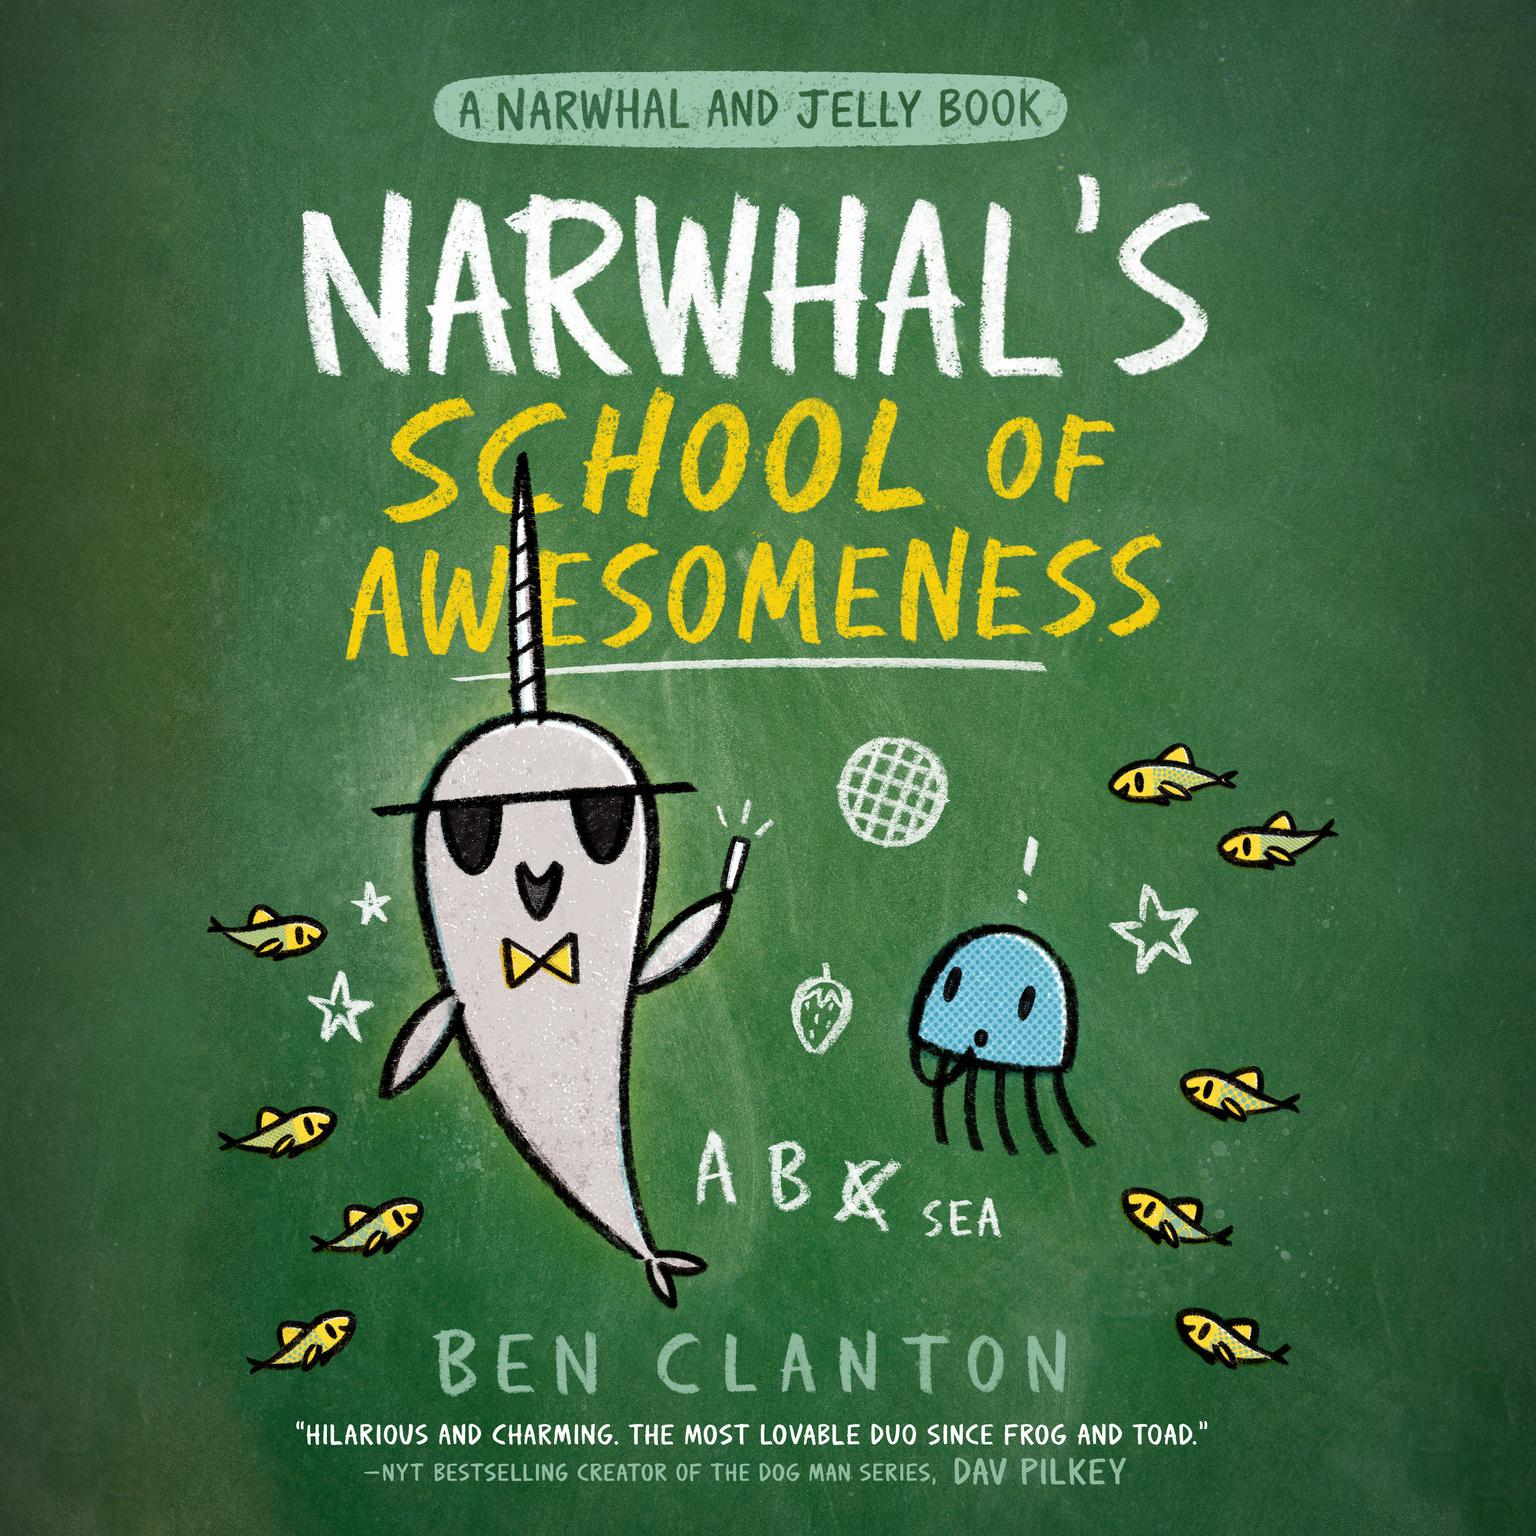 Narwhals School of Awesomeness (A Narwhal and Jelly Book #6) Audiobook, by Ben Clanton